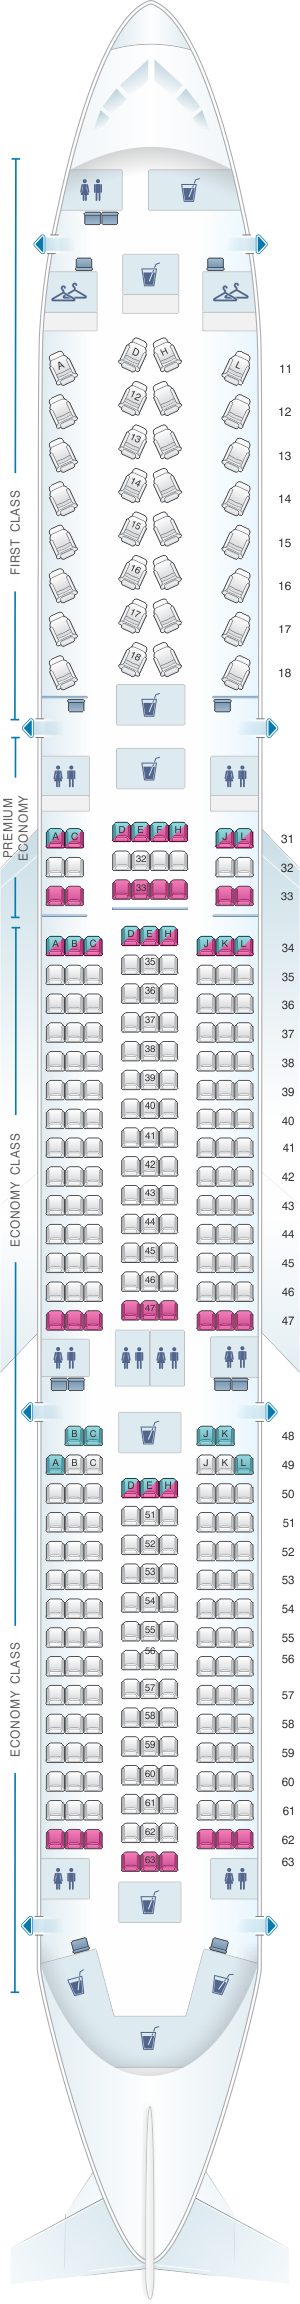 Seat map for Air China Airbus A350 900